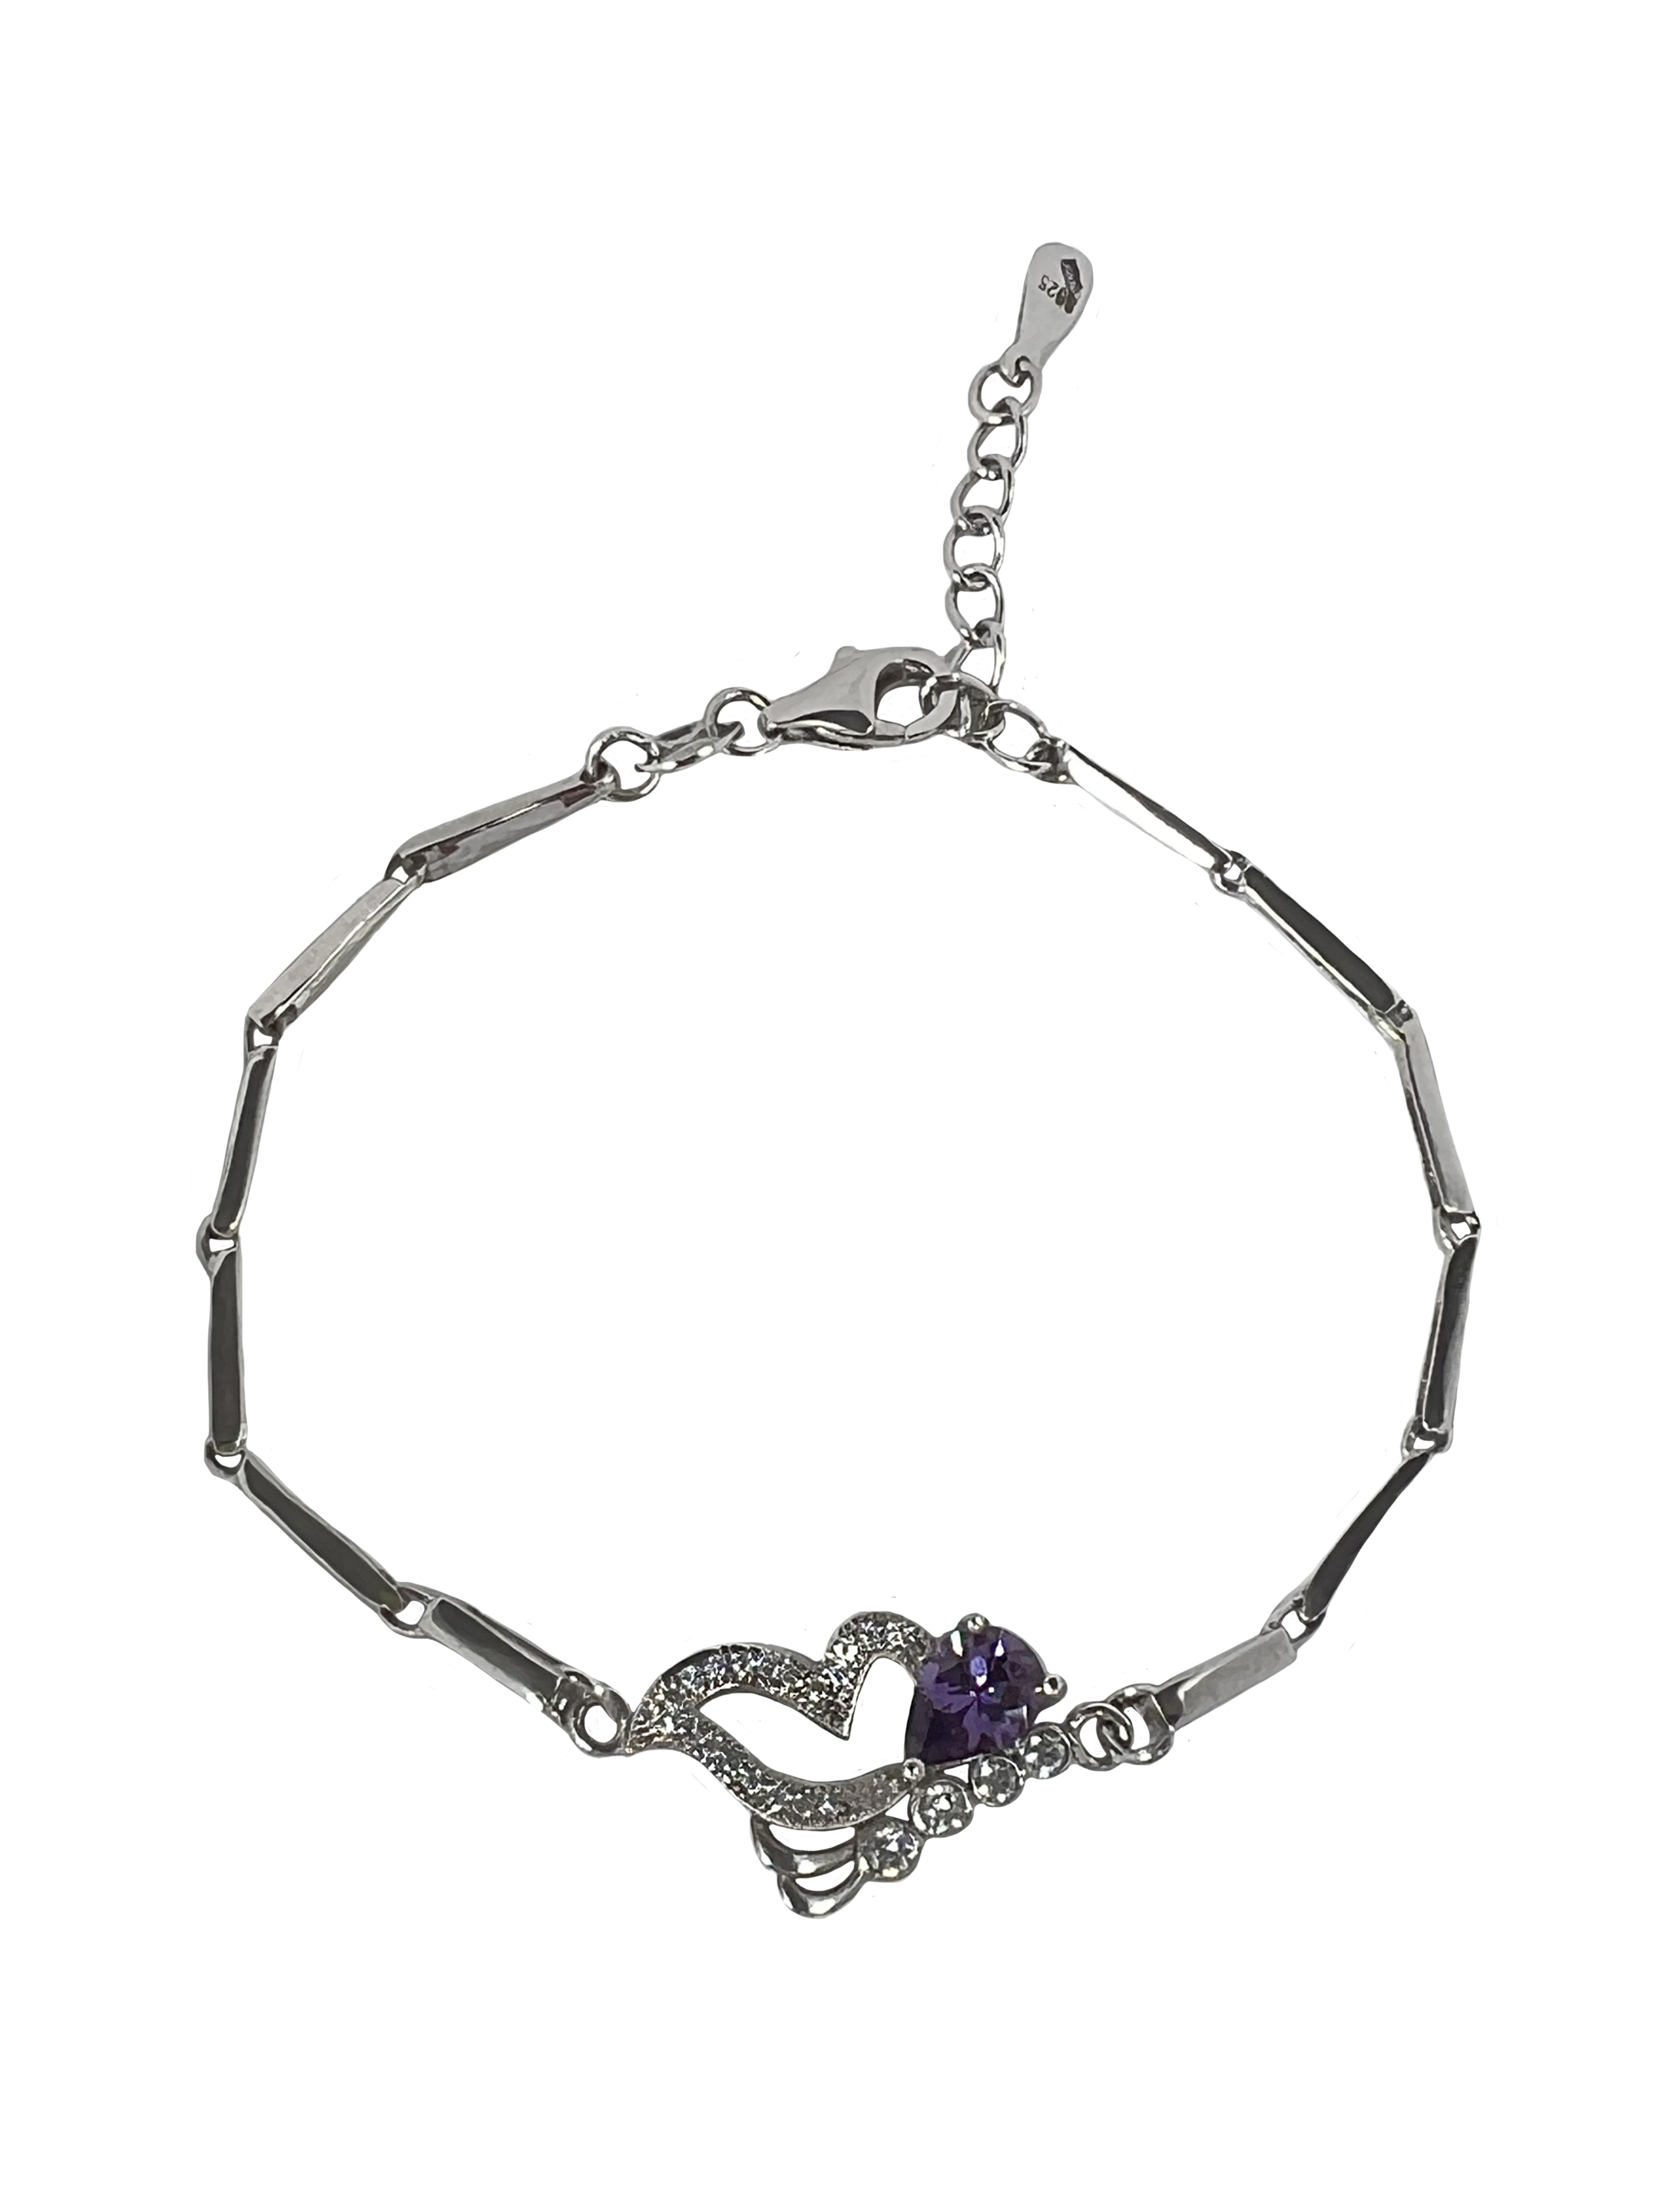 Silver bracelet with a butterfly and a purple stone